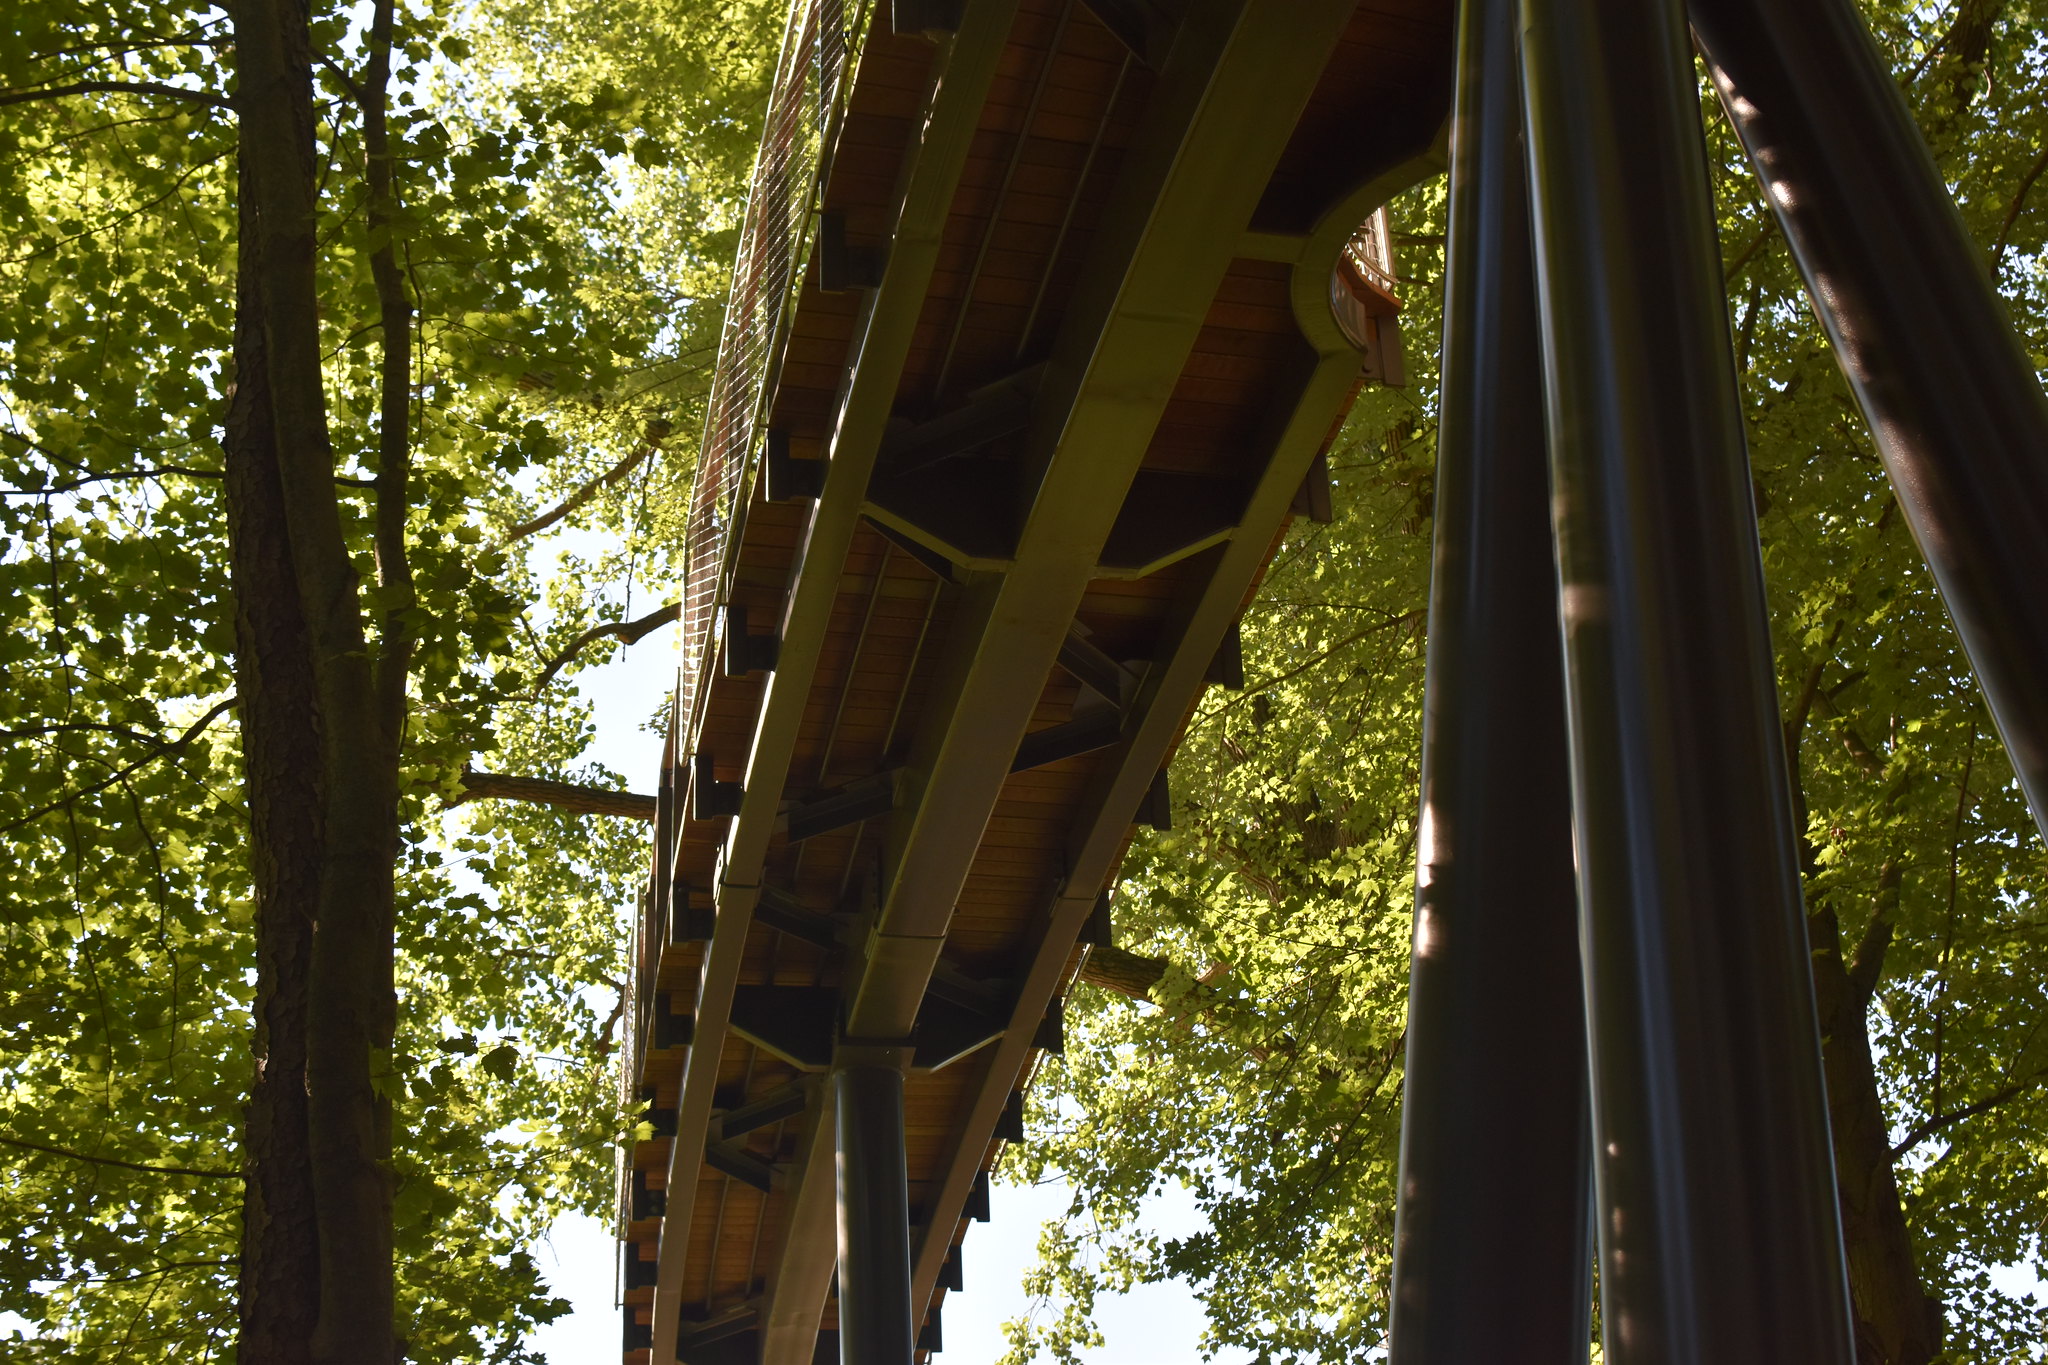 Whiting Forest of Dow Gardens Canopy Walk, An Adco Detailing Project, winner of the 2020 SDS2 Solid Steel Awards in Commercial, Small tonnage. Photo courtesy of Dow Gardens.